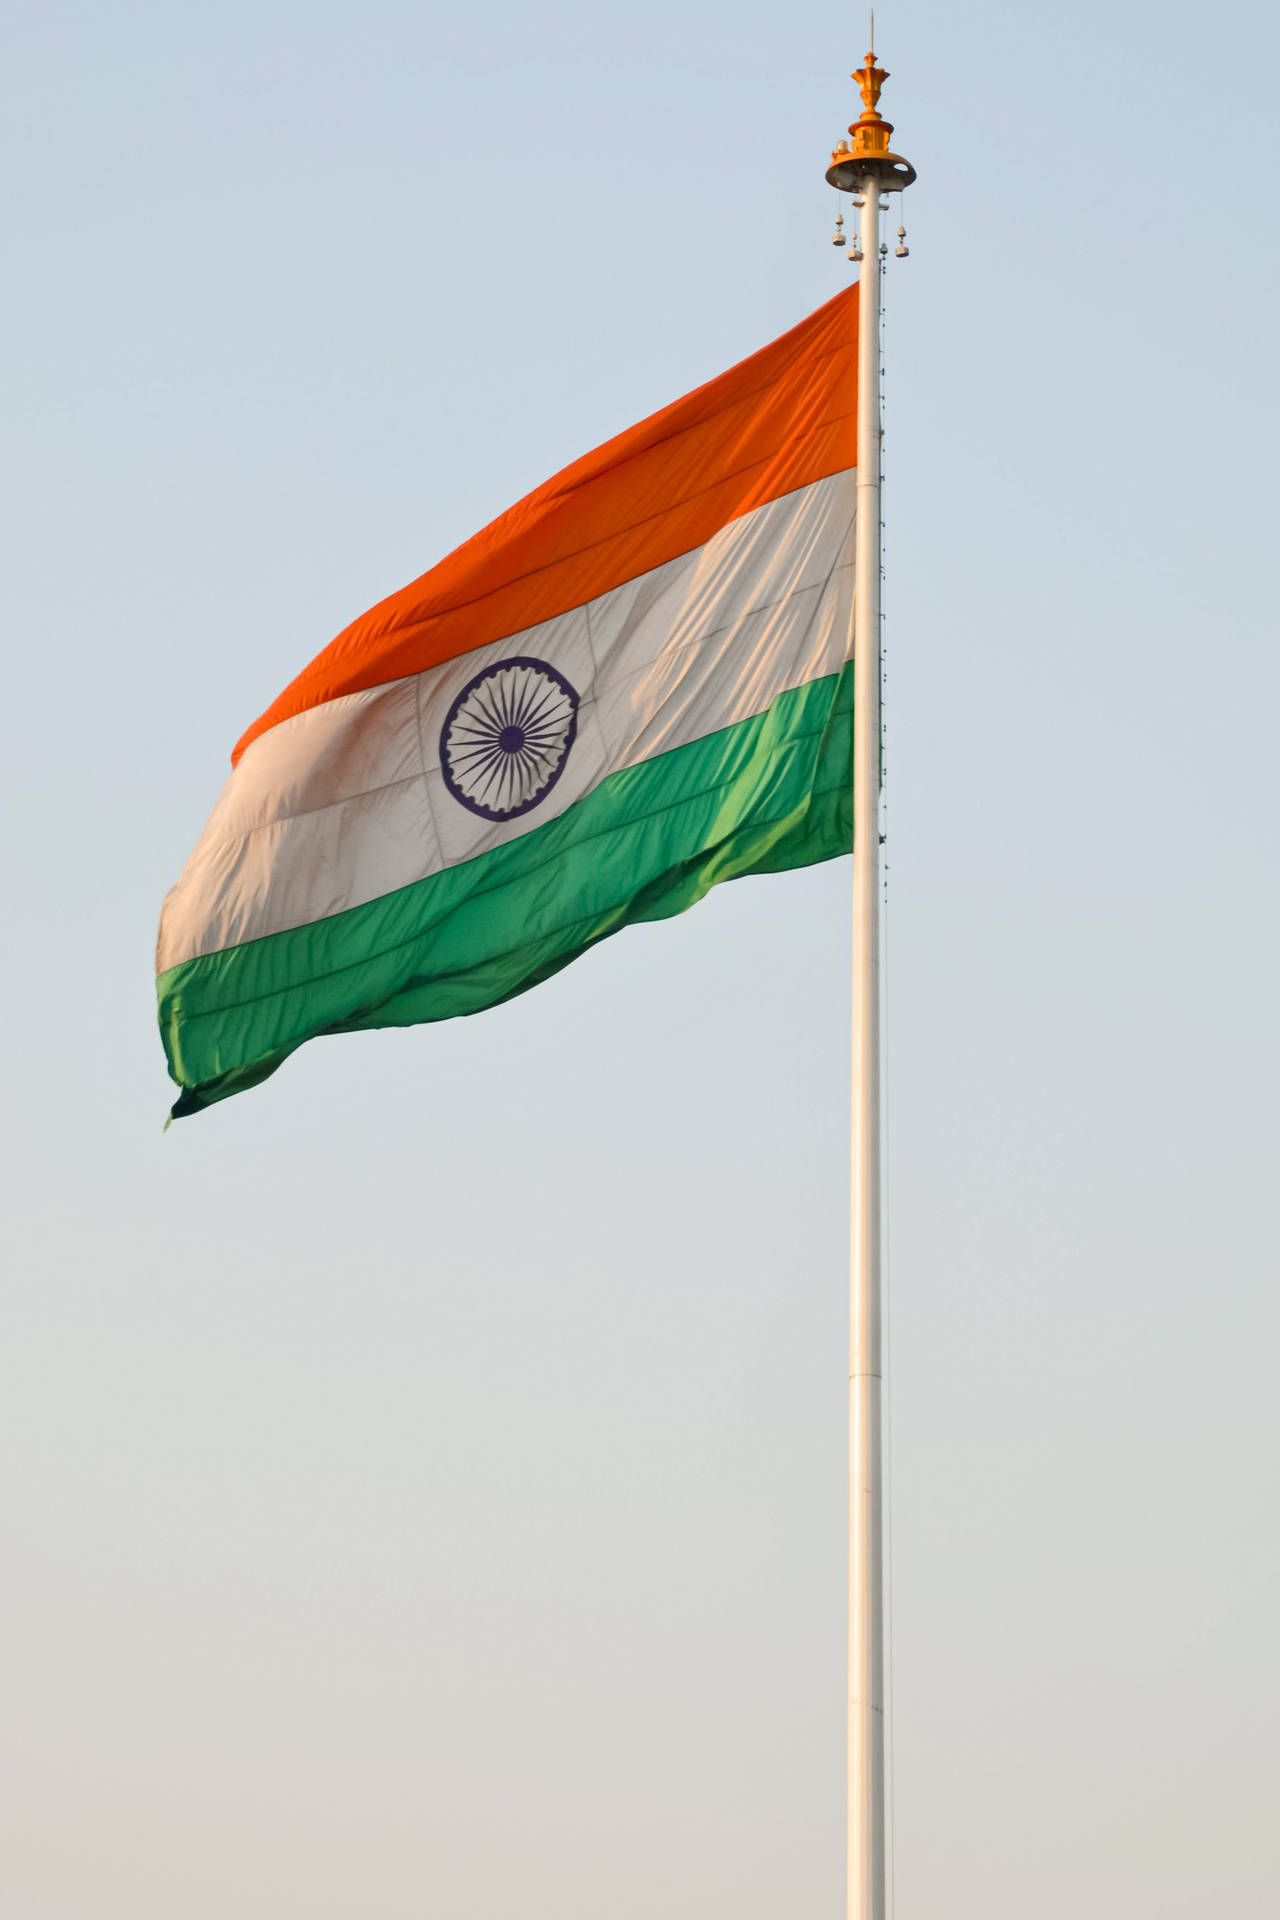 Real Indian Flag Hd In A Pole